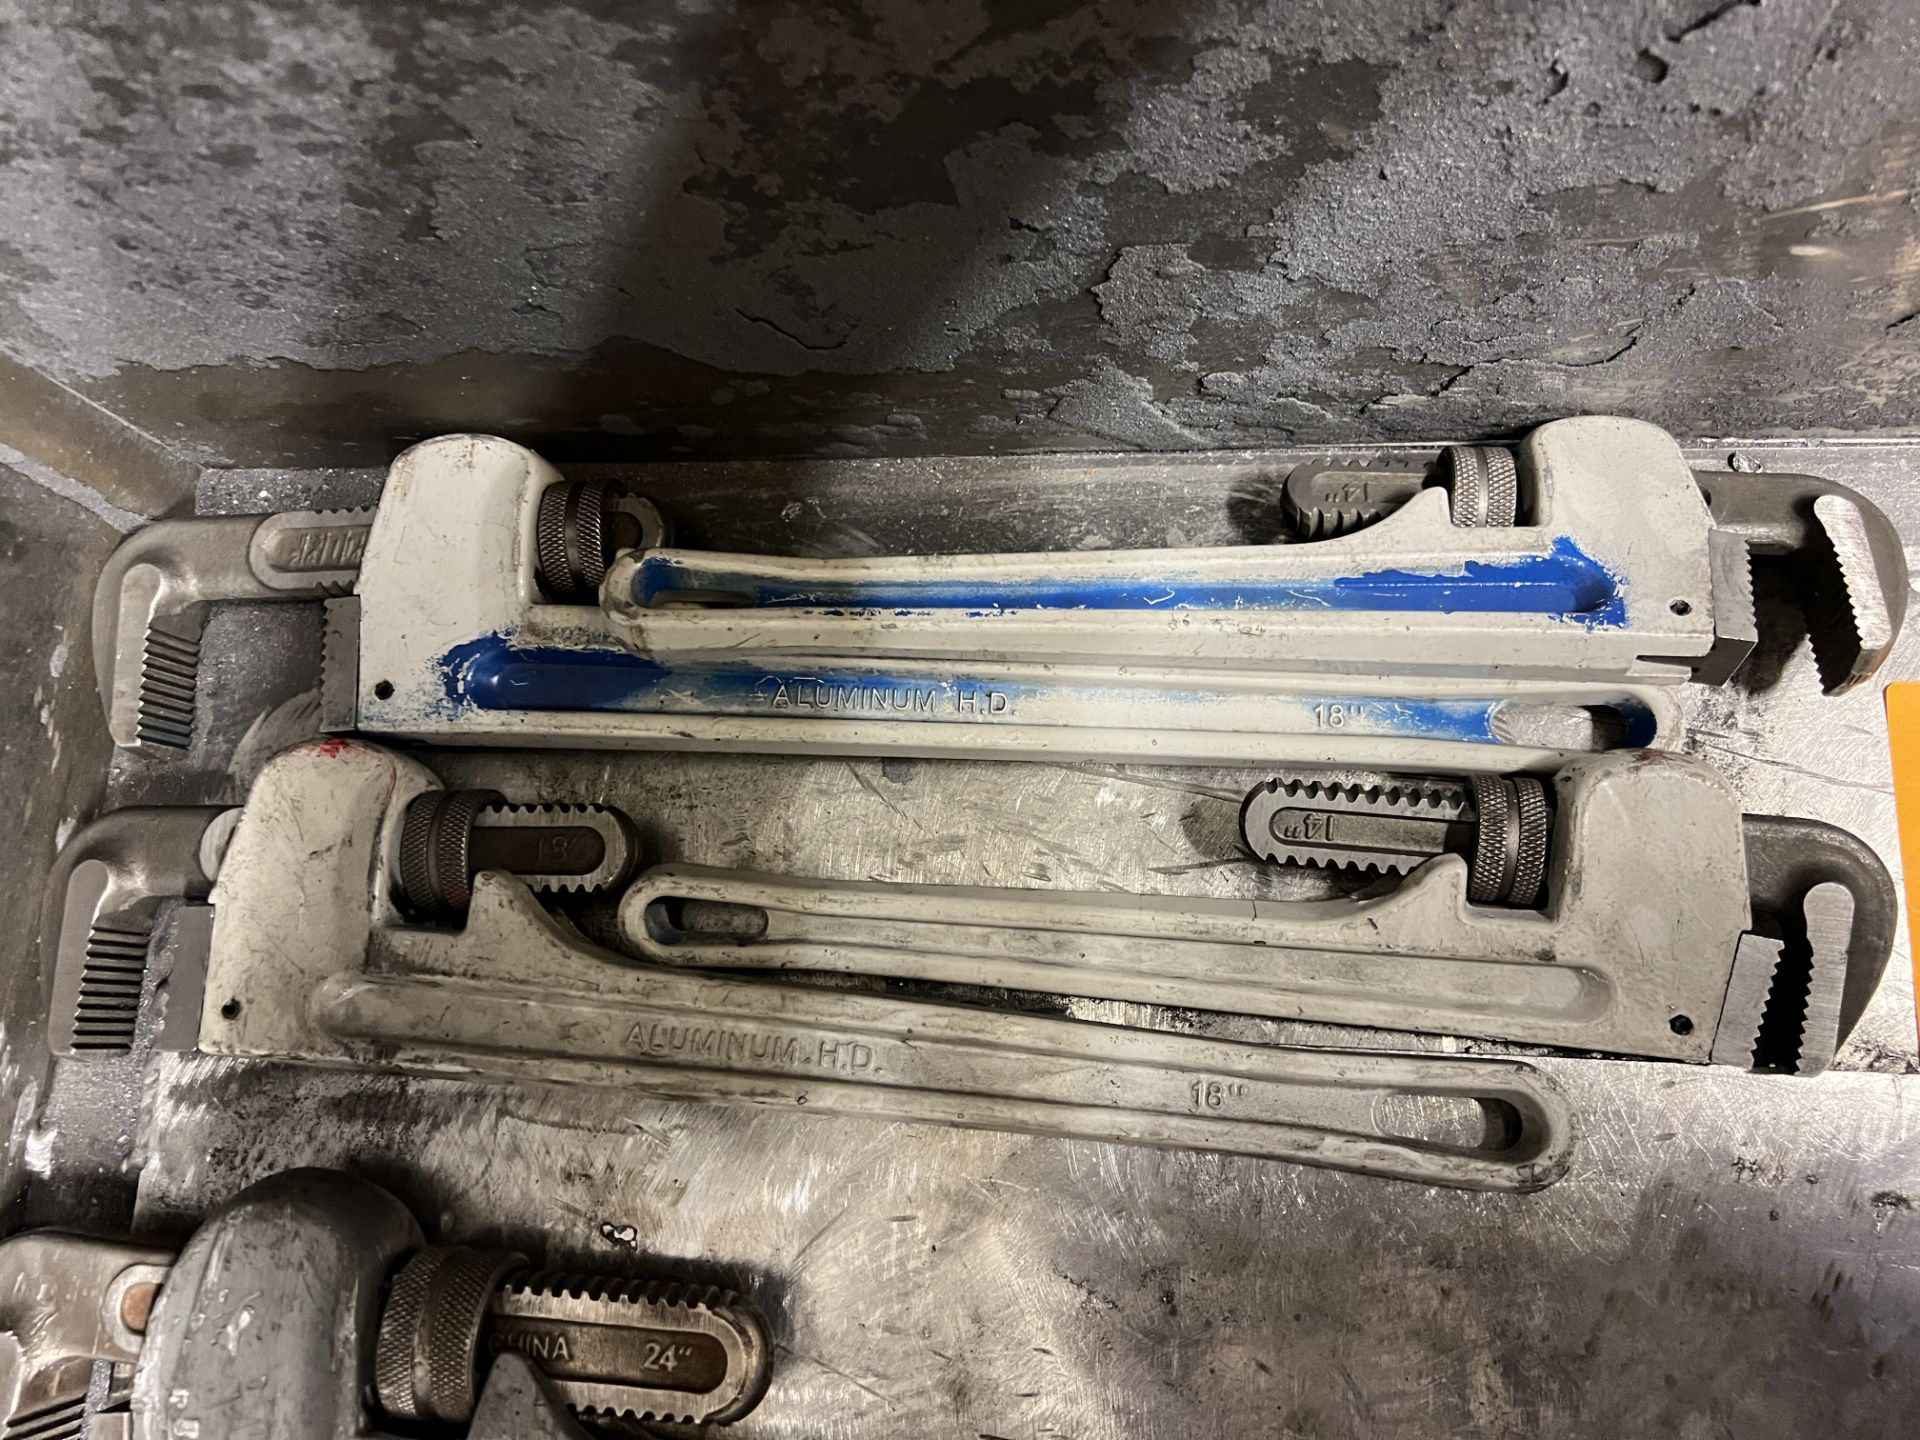 Plumbers Wrench - Image 2 of 2